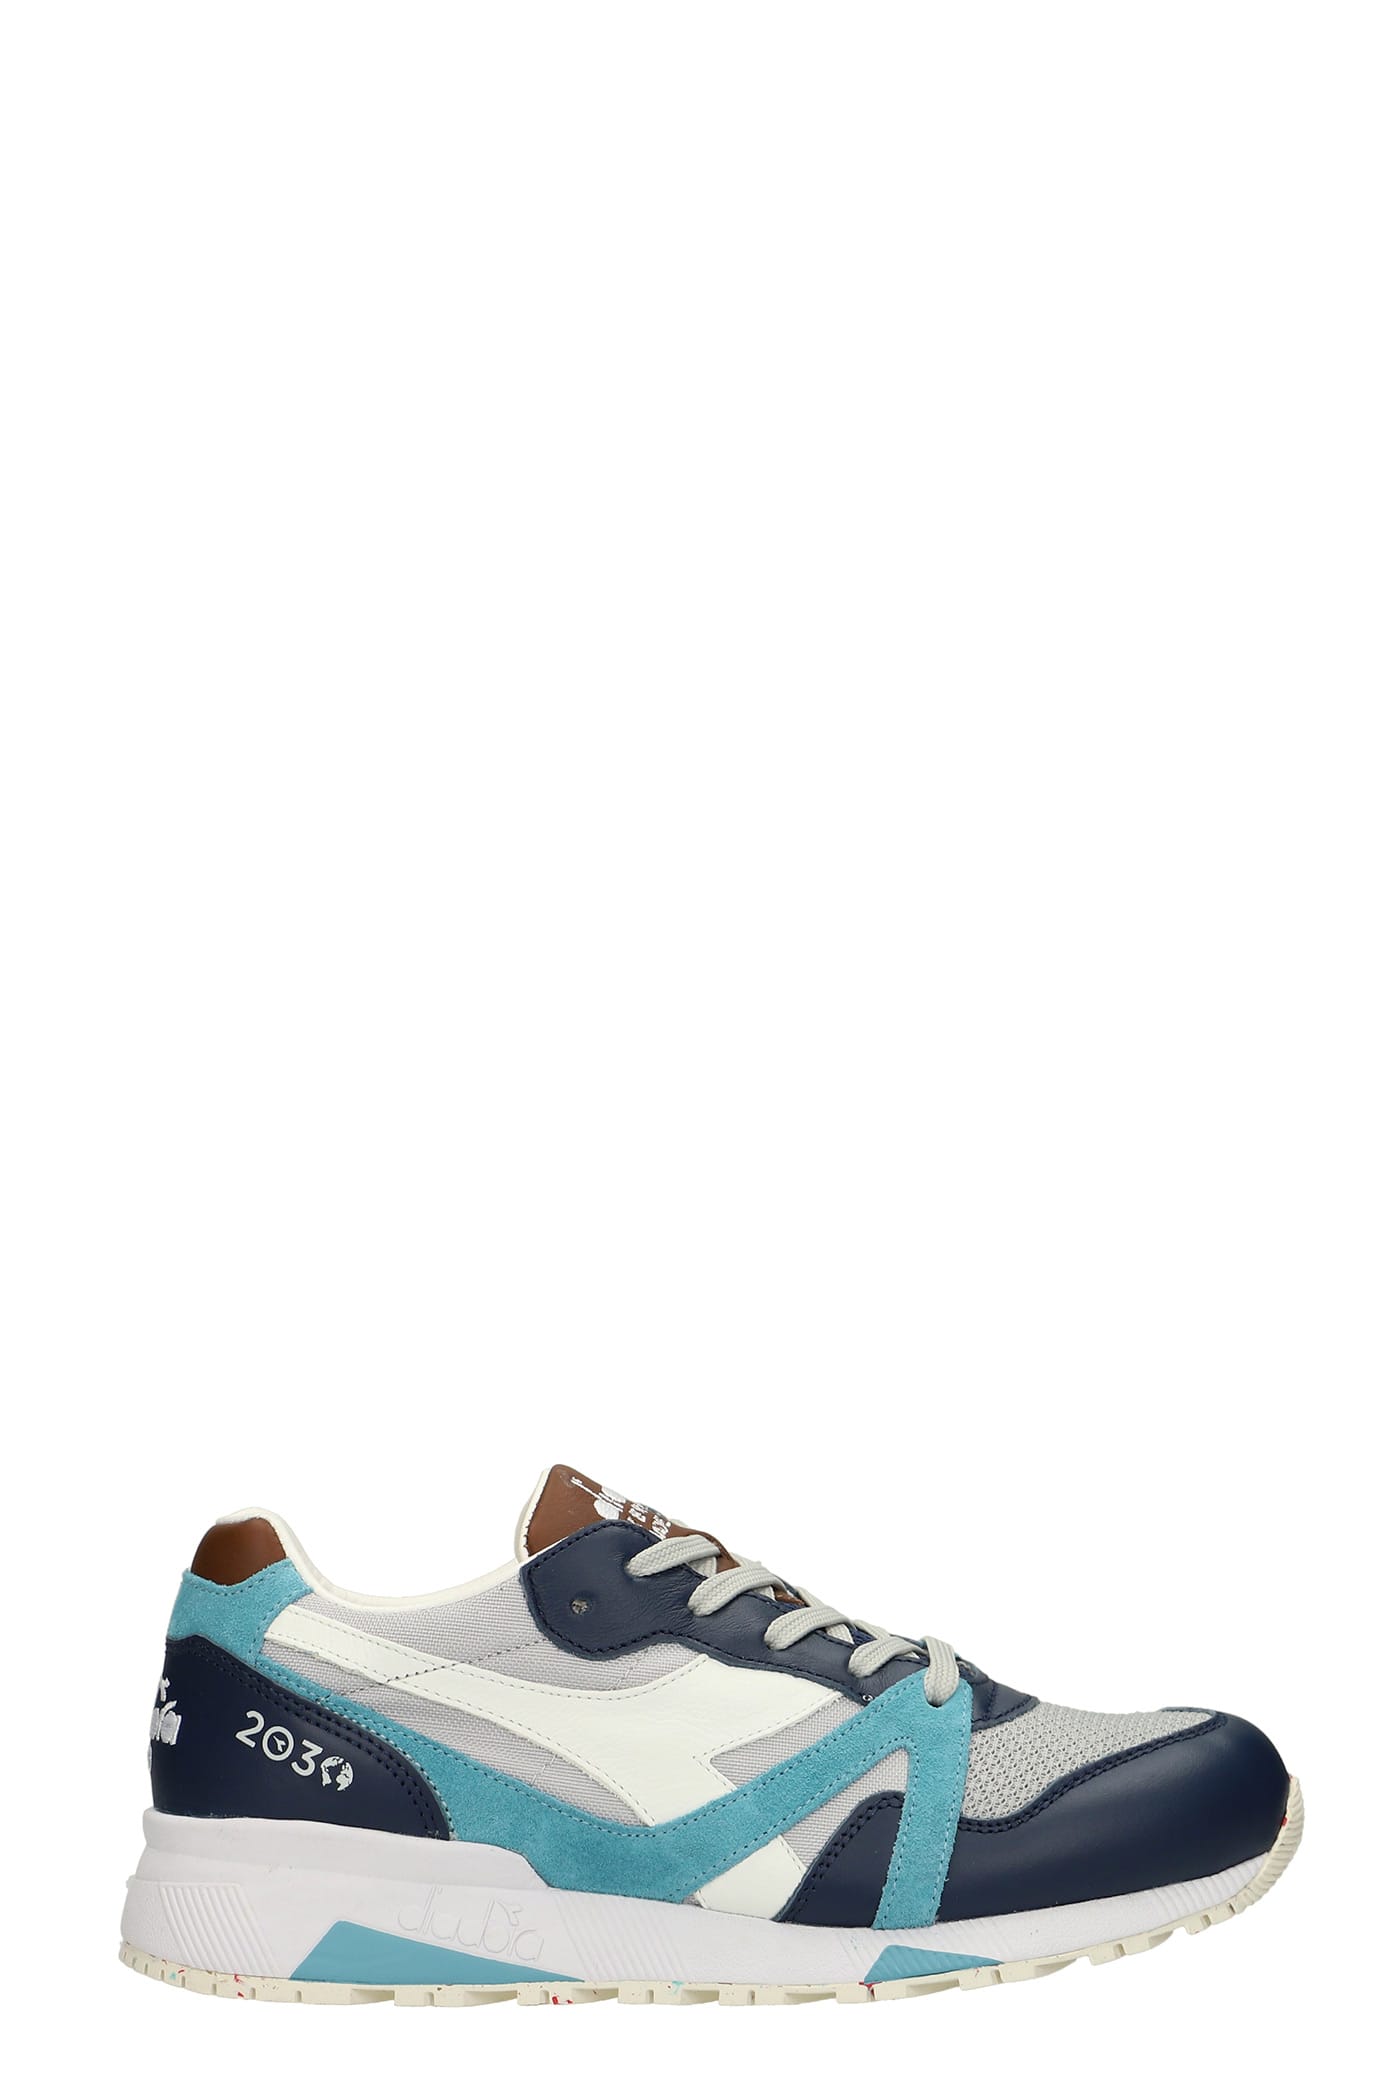 Diadora Heritage N9000 2030 Sneakers In Blue Leather And Fabric